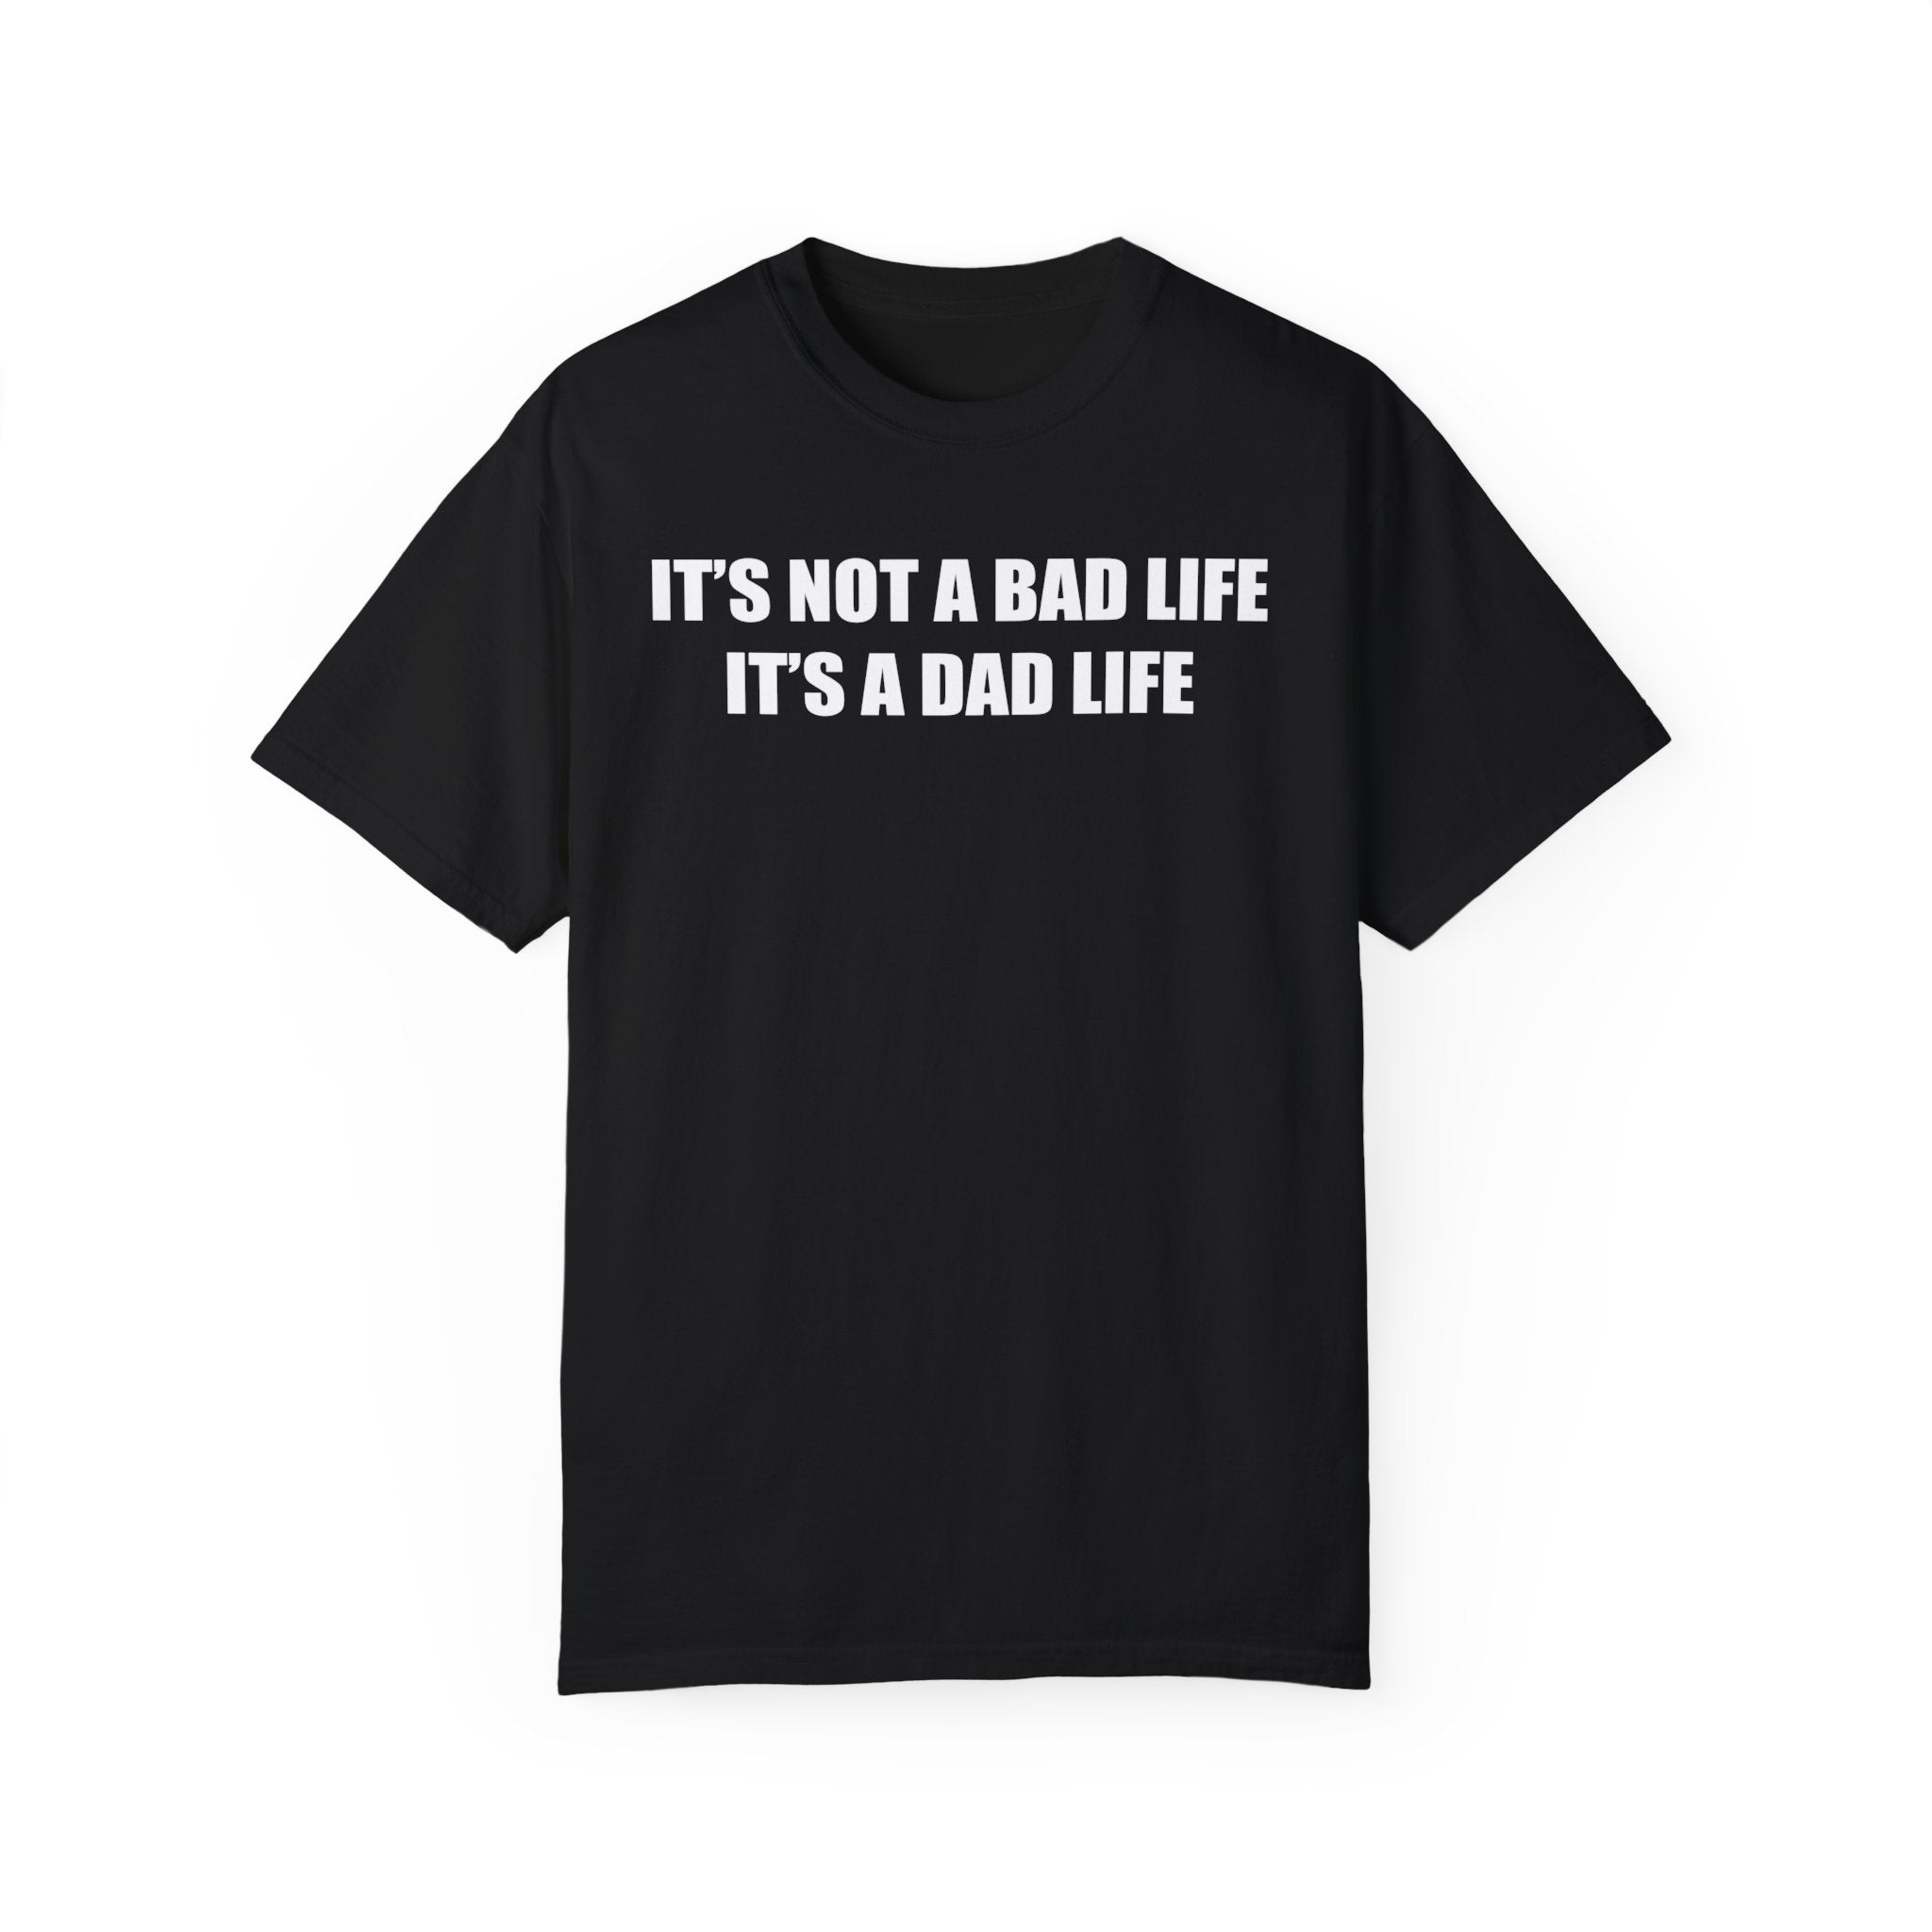 It's a Dad Life Tee